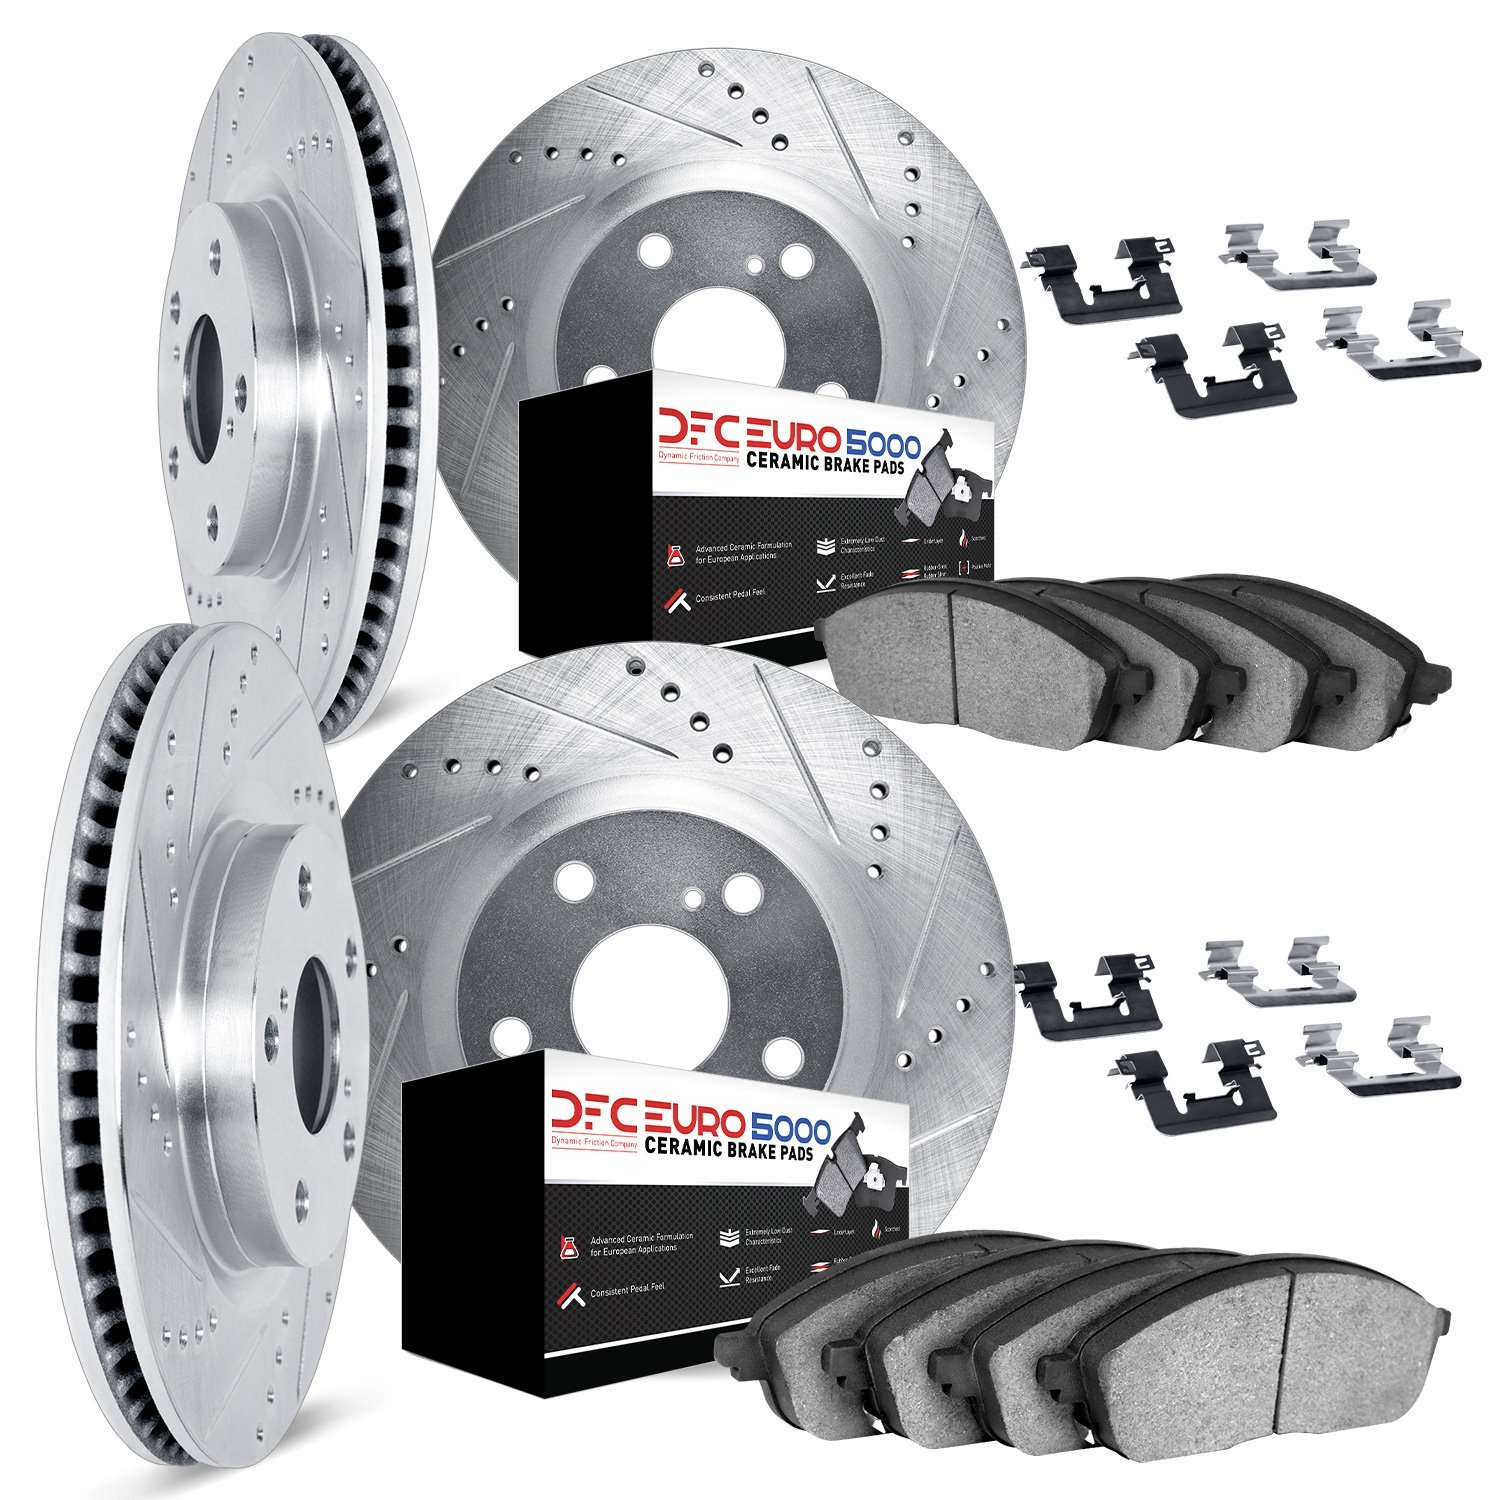 7614-31017 Drilled/Slotted Brake Rotors w/5000 Euro Ceramic Brake Pads Kit & Hardware [Silver], 2001-2003 BMW, Position: Front a